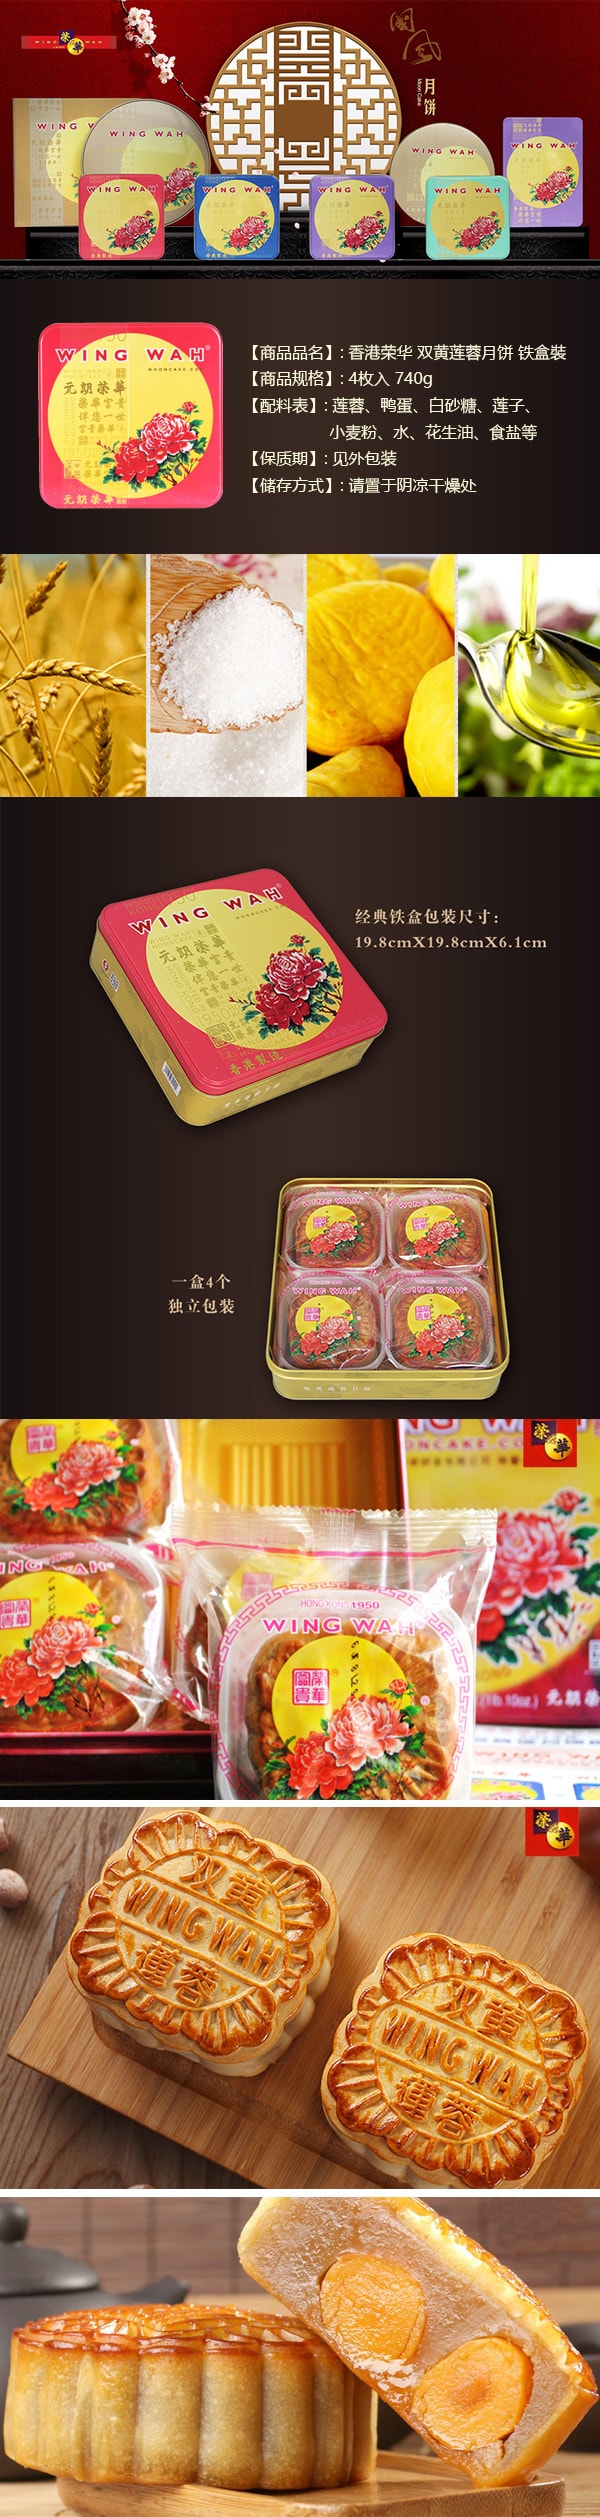 White Lotus Seed Paste Mooncake With 2 Yolks 4pcs Gift Box 740g 【Delivery Date: End of August】